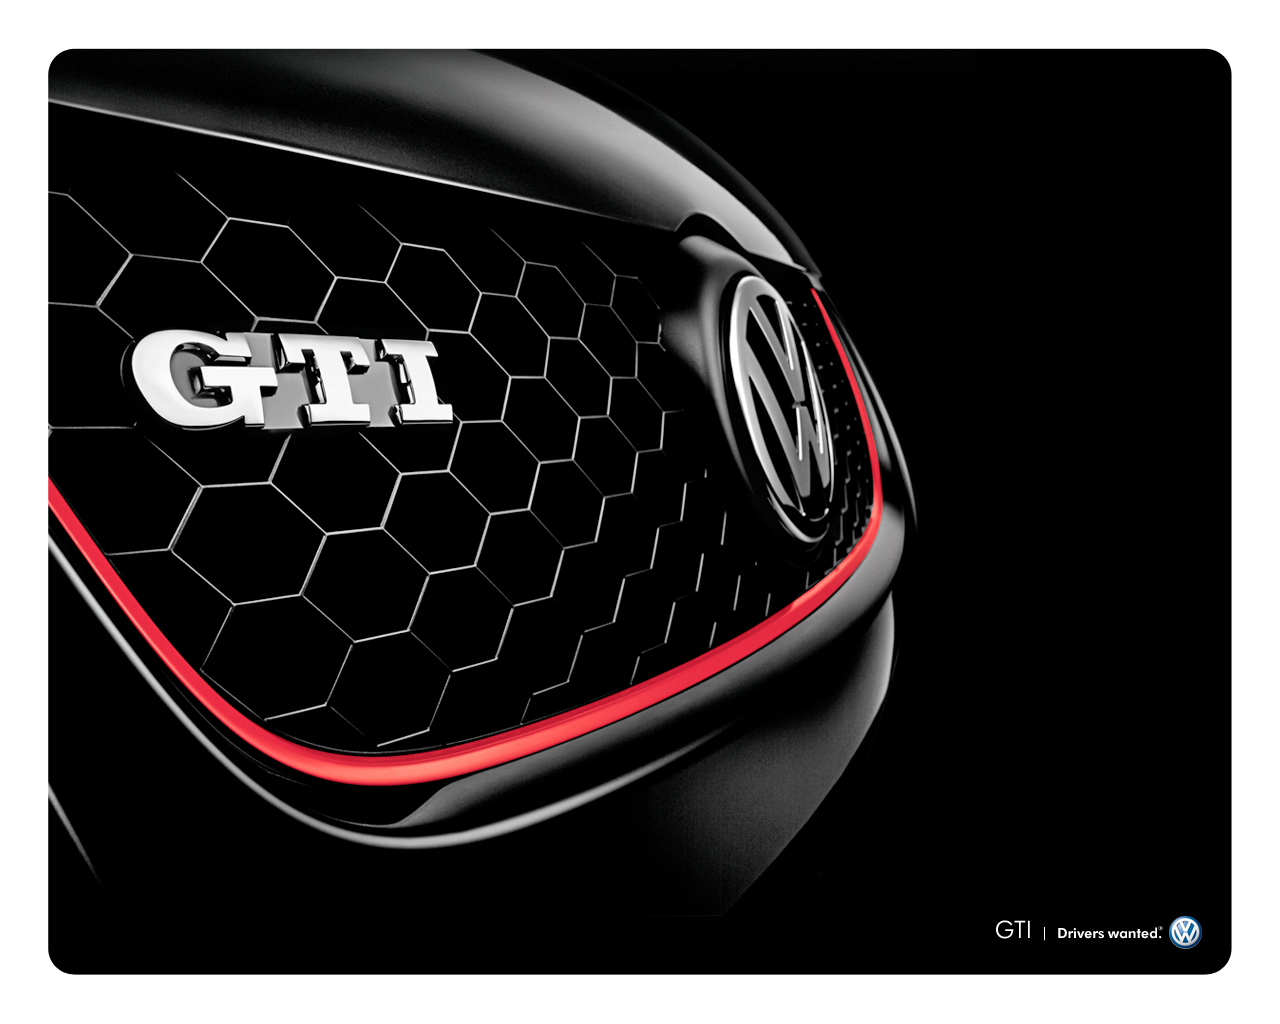 Volkswagen HD Wallpaper Check Out The Cool